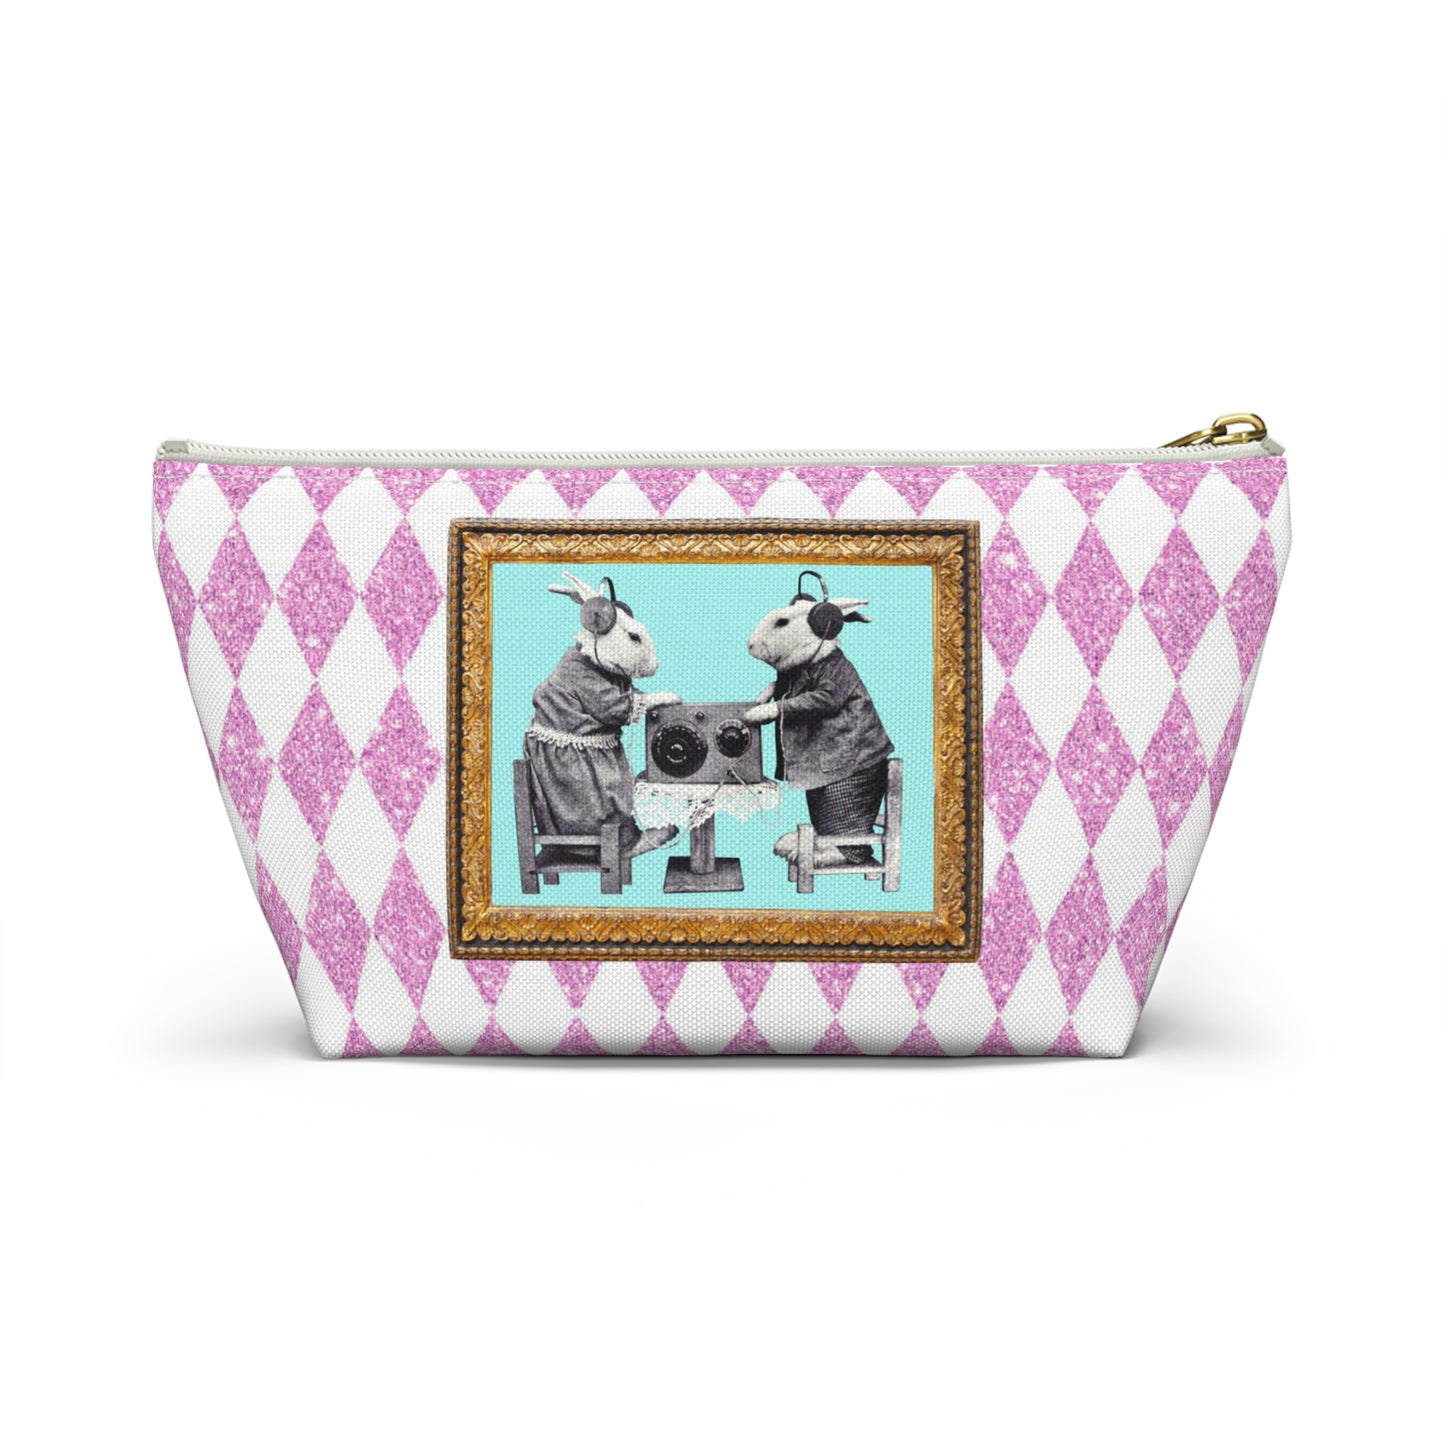 Bunnies in Headphones Graphic on T-Bottom Travel Pouch Bag, Hot Pink Glitter Print Harlequin Background, Two Convenient Size Options